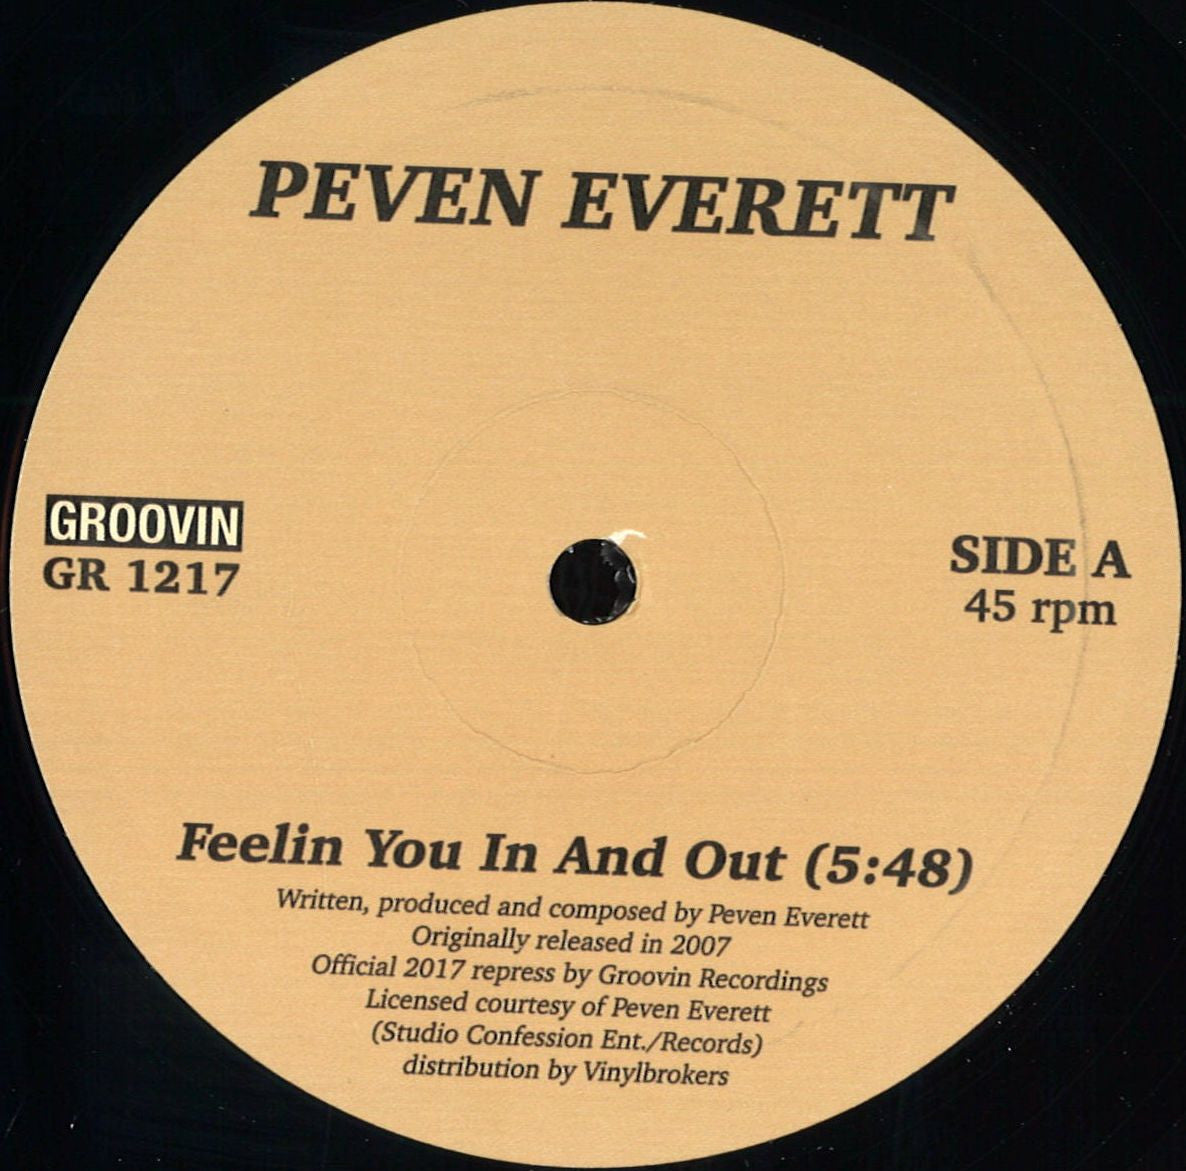 Peven Everett – Feelin You In And Out